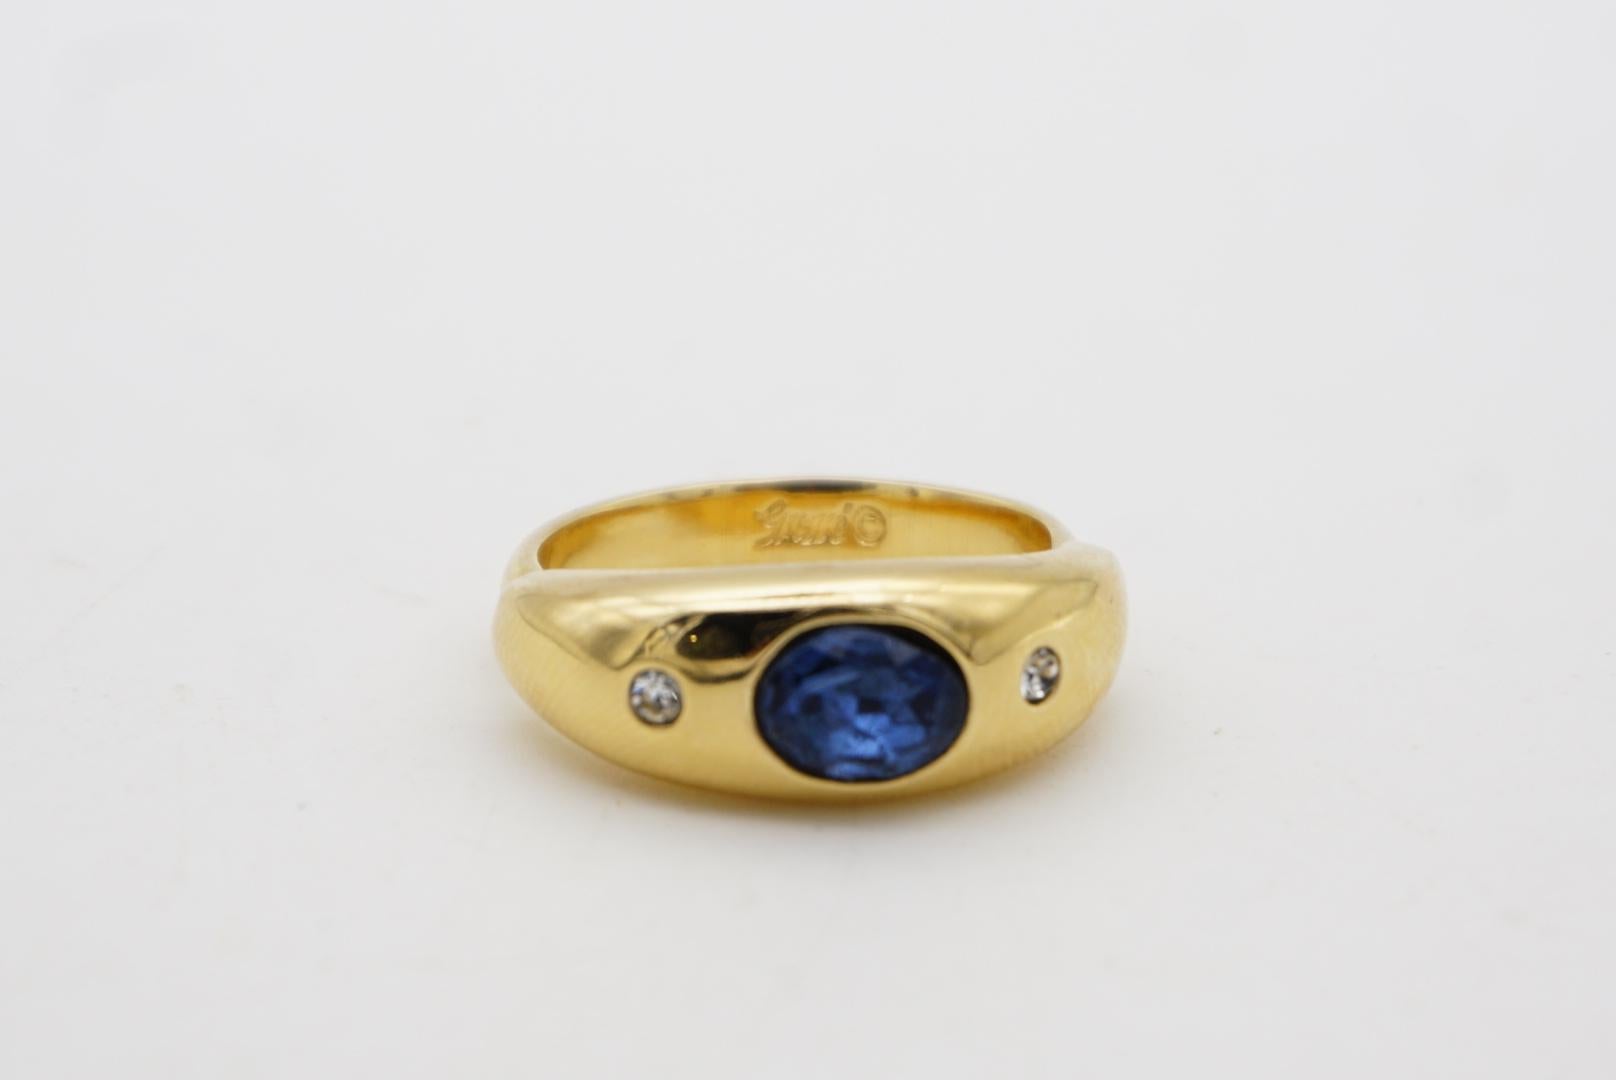 Christian Dior GROSSE 1960s Sapphire Navy Oval Crystal Charm Band Ring US 7 1/2 4